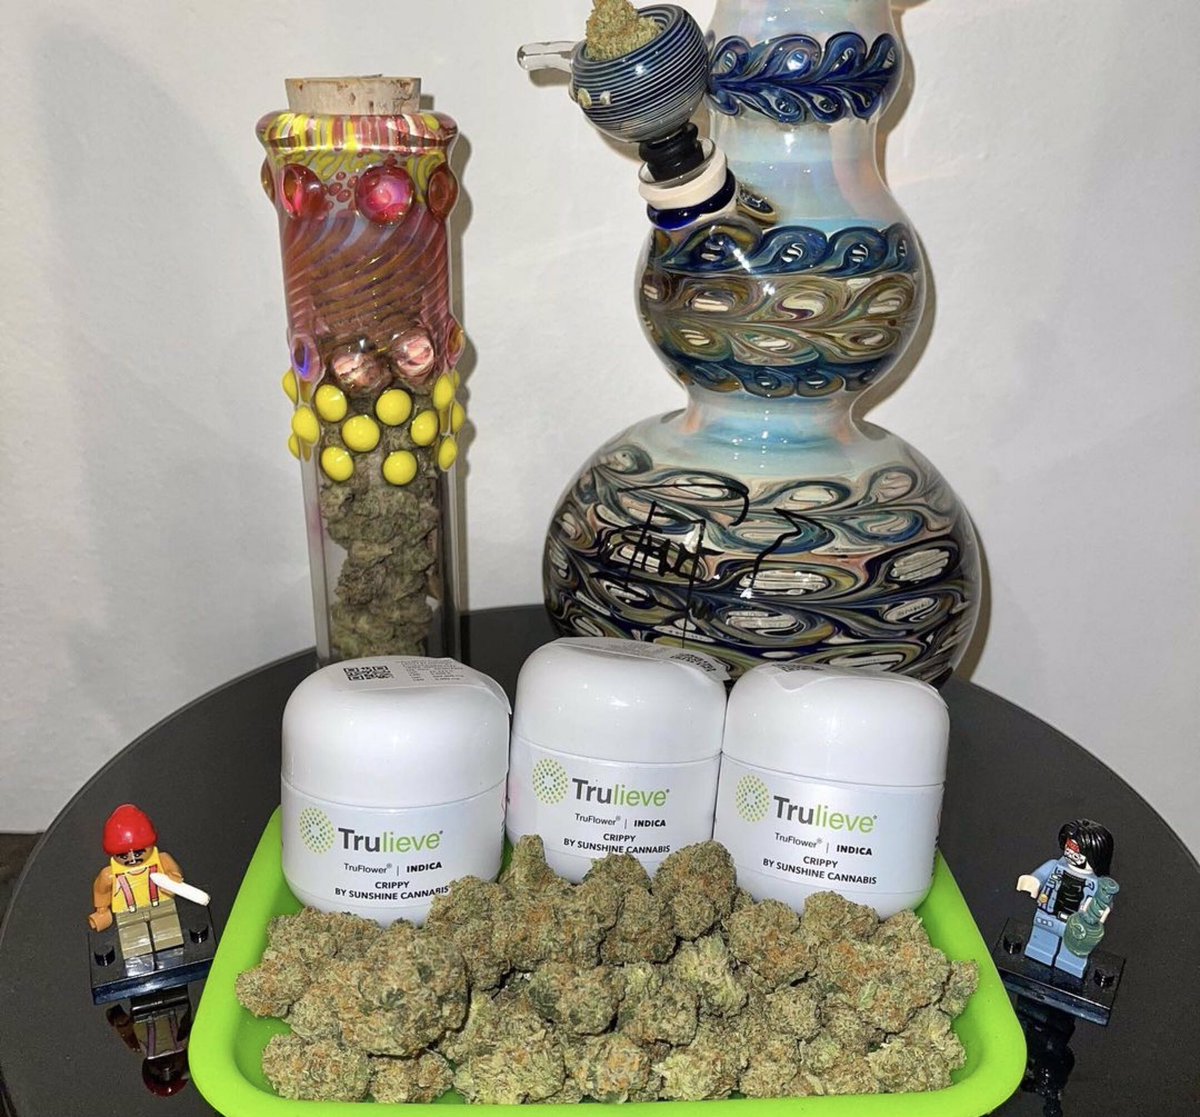 Crippy ⛽️ 🔥And we all know my favorite way to medicate is with my Chong Bong! #chongbong #sunshinecannabis #sunshinefam #sunshinevip #crippynotjippy #tommychong #grinderglass #trulieve #truliever #420md #houstontx #exotic #exoticbeauty #beautifulweed #wichita #bny #nycevent #thc